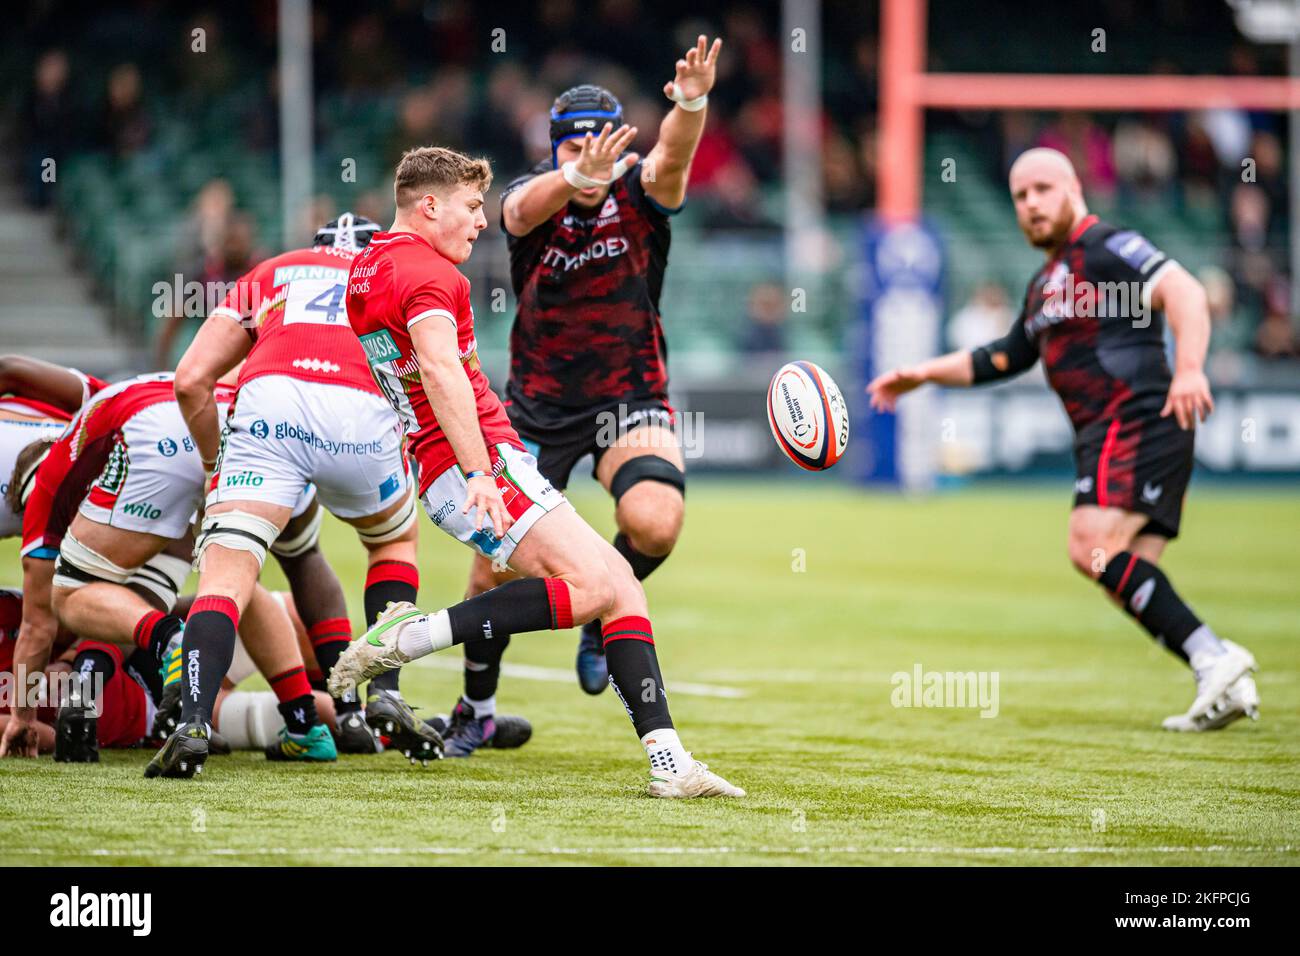 LONDON, UNITED KINGDOM. 19th, Nov 2022. Sam Edwards of Leicester Tigers (V.Capt) in action during Premiership Rugby Match Round 4 between Saracens vs Leicester Tigers at StoneX Stadium on Saturday, 19 November 2022. LONDON ENGLAND.  Credit: Taka G Wu/Alamy Live News Stock Photo